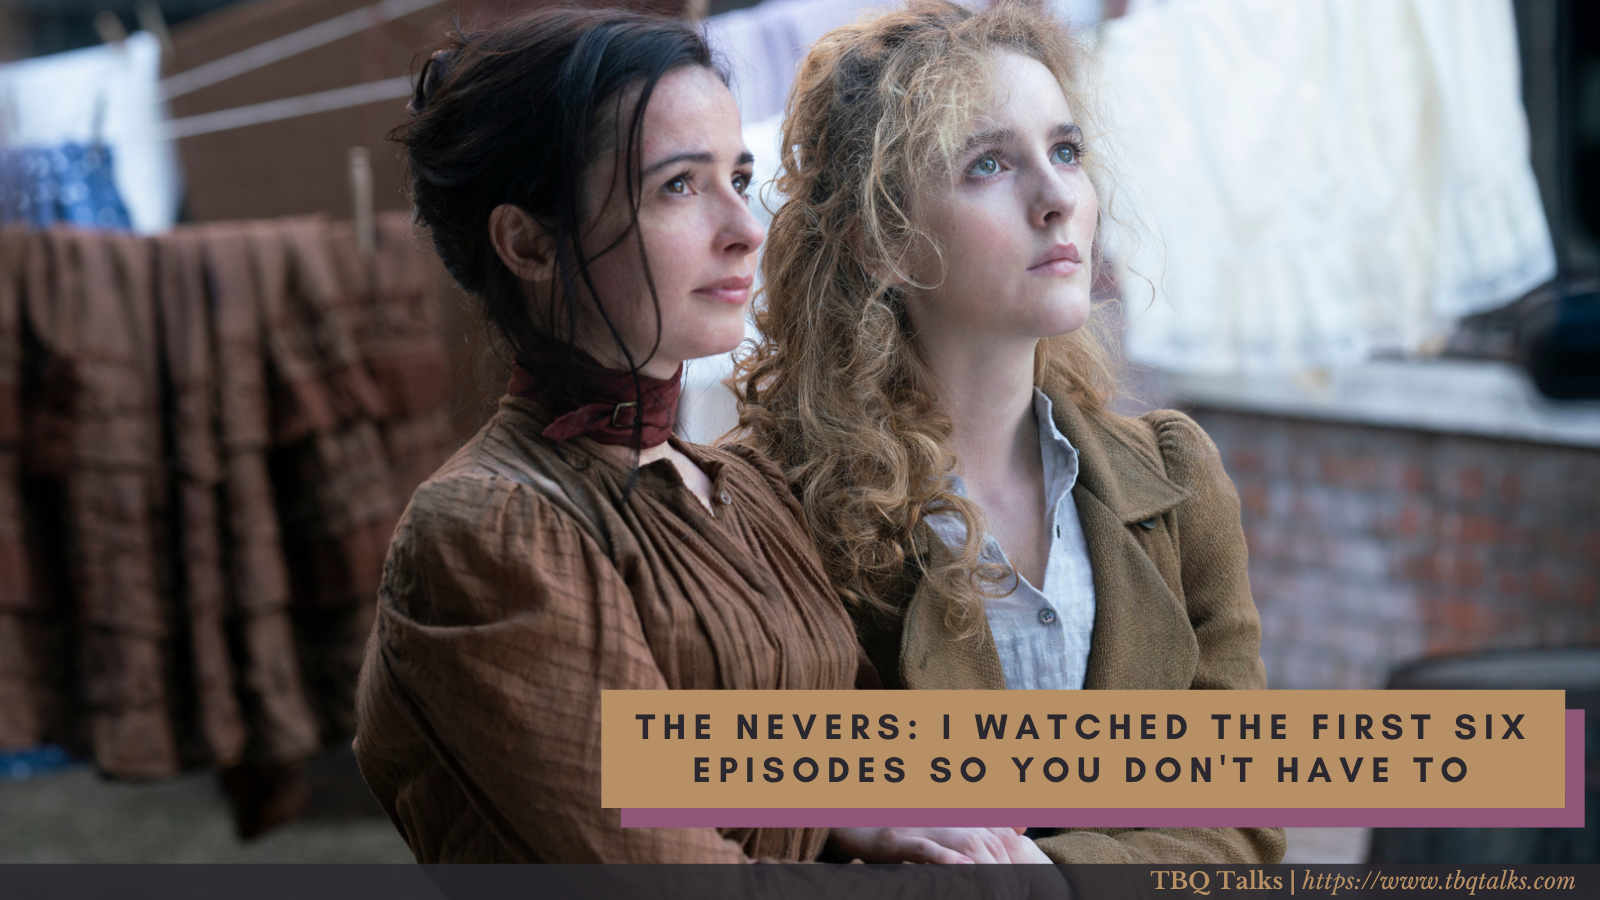 The Nevers: I Watched The First Six Episodes So You Don't Have To